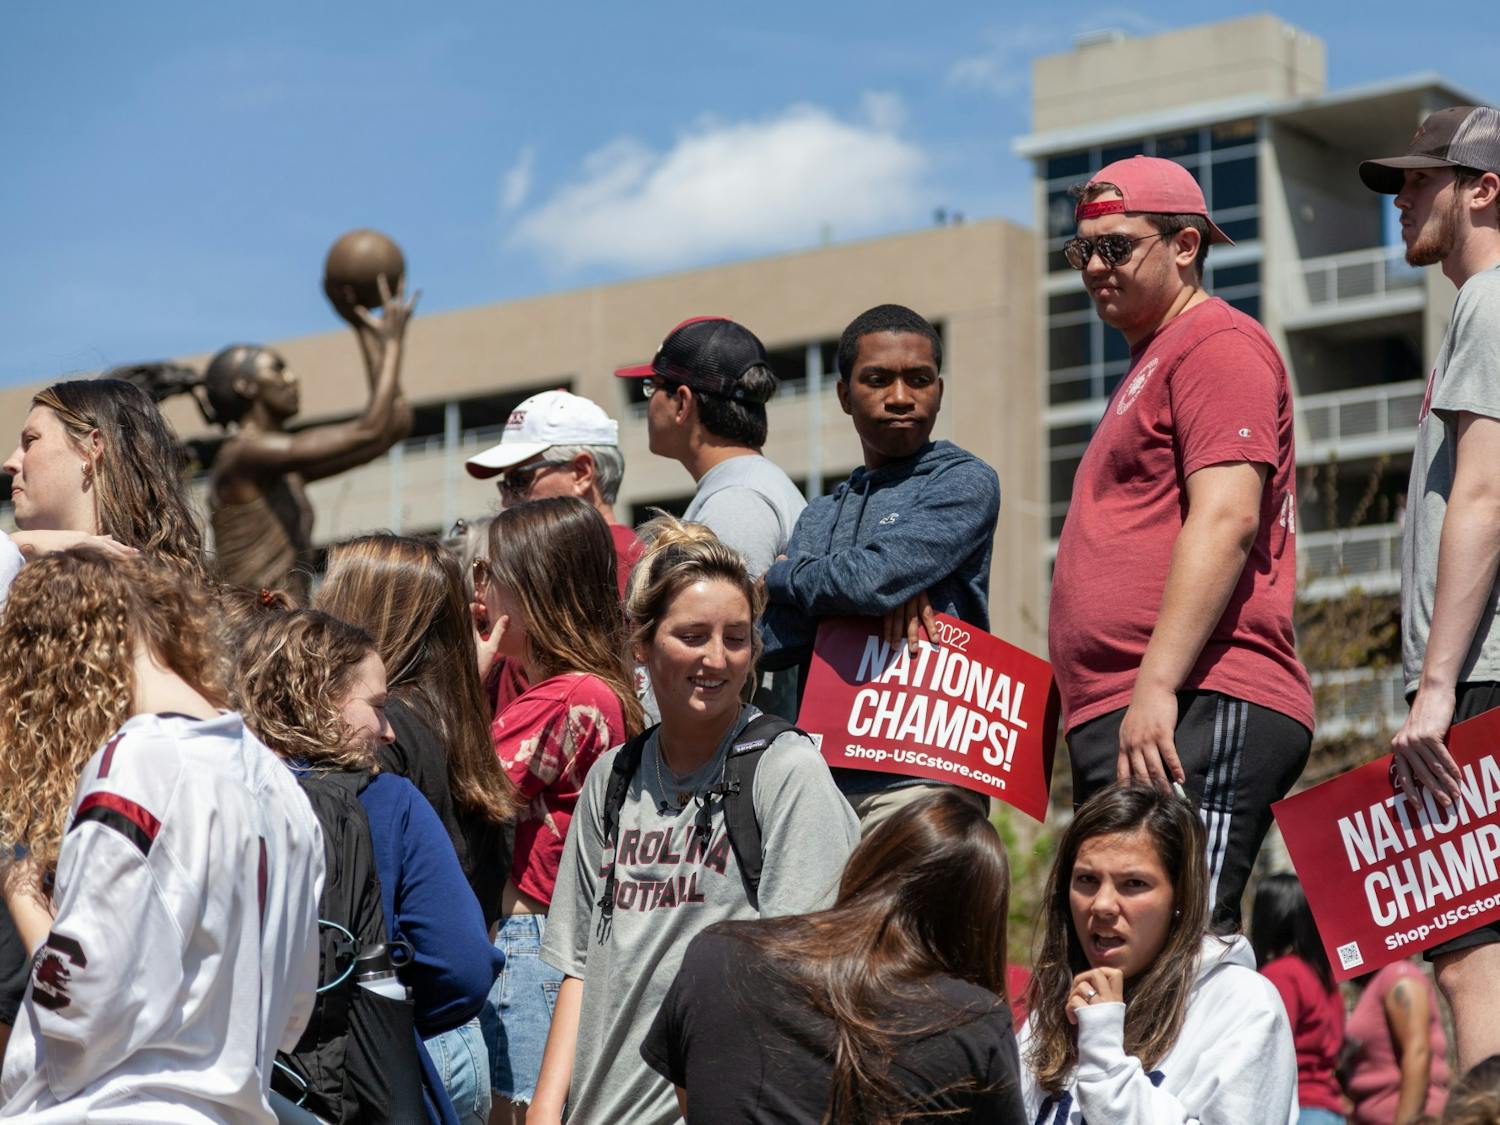 South Carolina fans prepare for the women's basketball team to arrive at Colonial Life Arena in Columbia, SC on April 4, 2022. Fans crowded the arena before the team arrived.